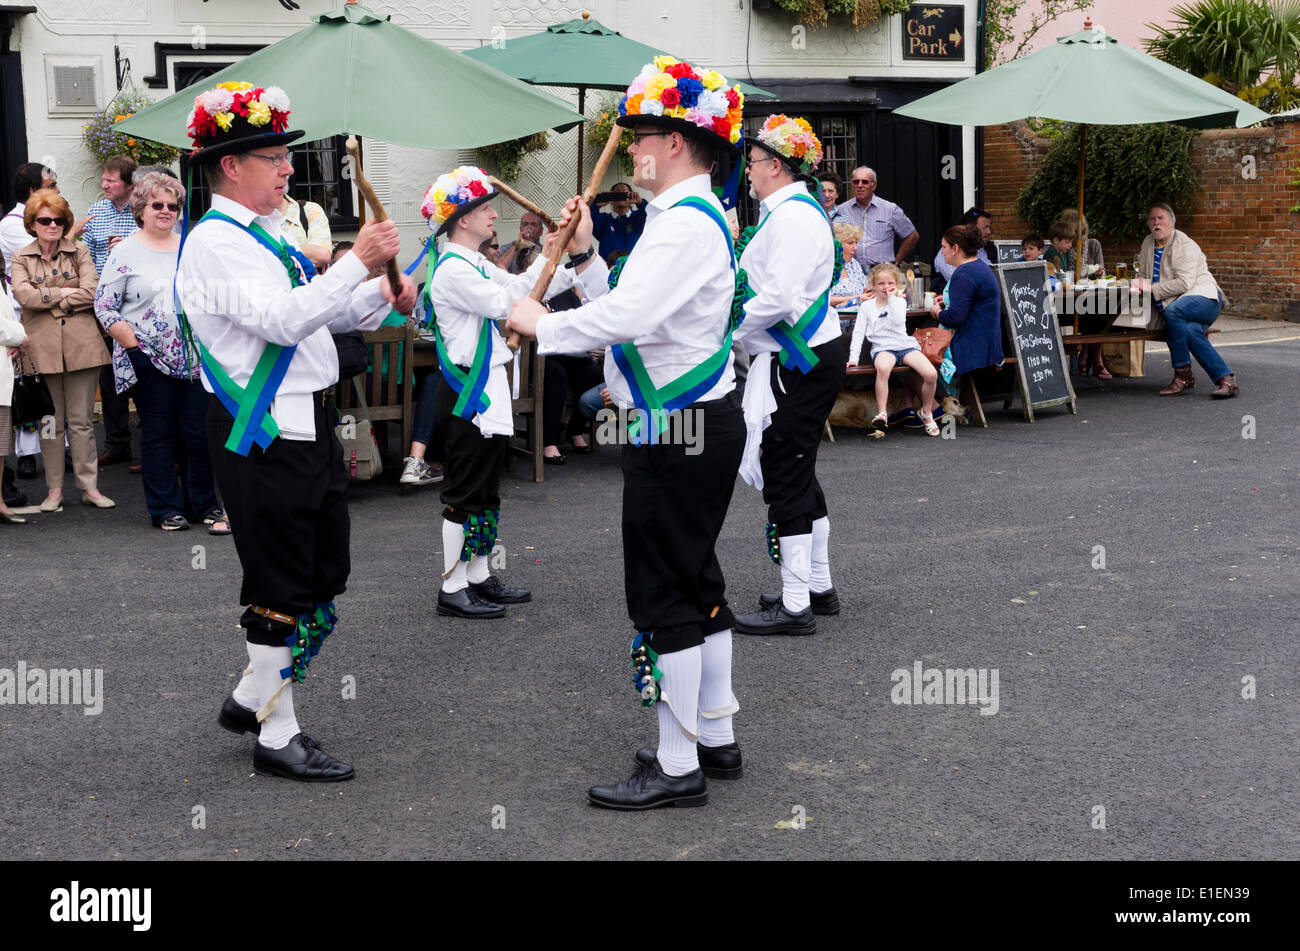 Etcetera morris men from Enfield dancing at the Fox Inn Finchingfield, Braintree, Essex, UK  as part of the Morris Ring Festival.  This festival has been held annually since 1934.  Morris dancing is an English folk dance traditionally undertaken by labourers but now by men of all classes.  The dance may be a fertility rite. 31st May 2014. Stock Photo